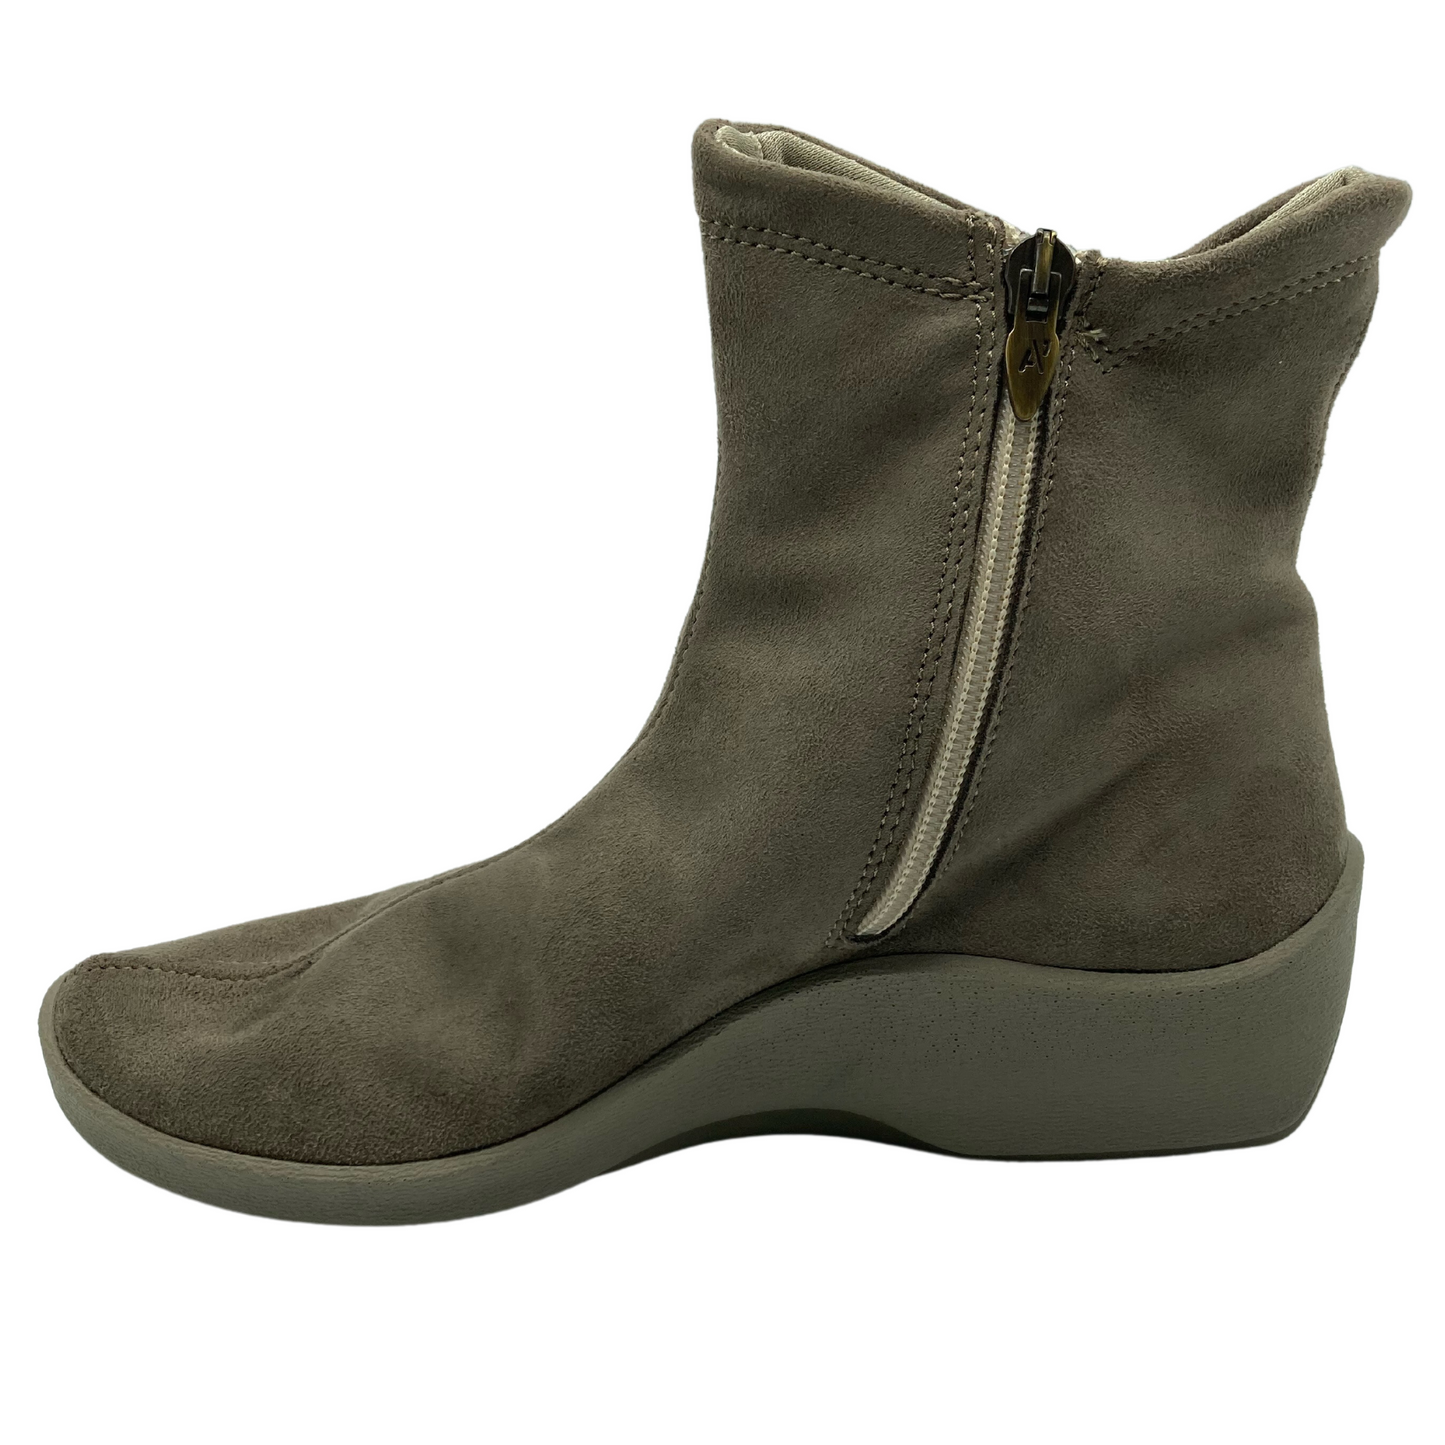 Left facing view of faux suede short boot with inner side zipper and rubber outsole